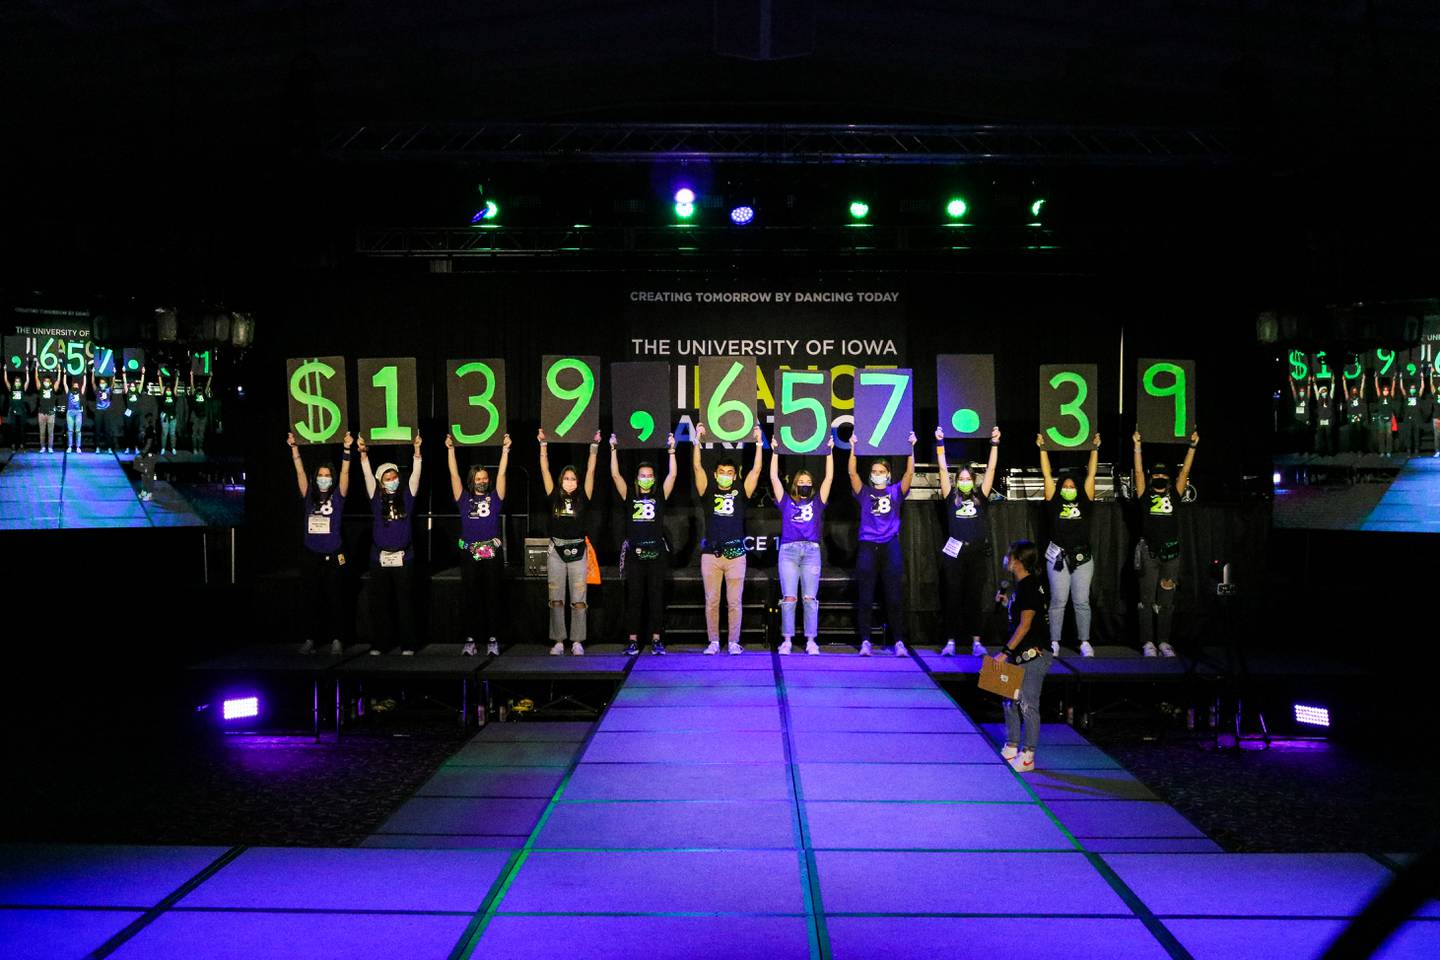 Alex Tyndall of Crystal Lake helped organize the University of Iowa’s annual Dance Marathon to raise funds for the university’s Stead Family Children’s Hospital.